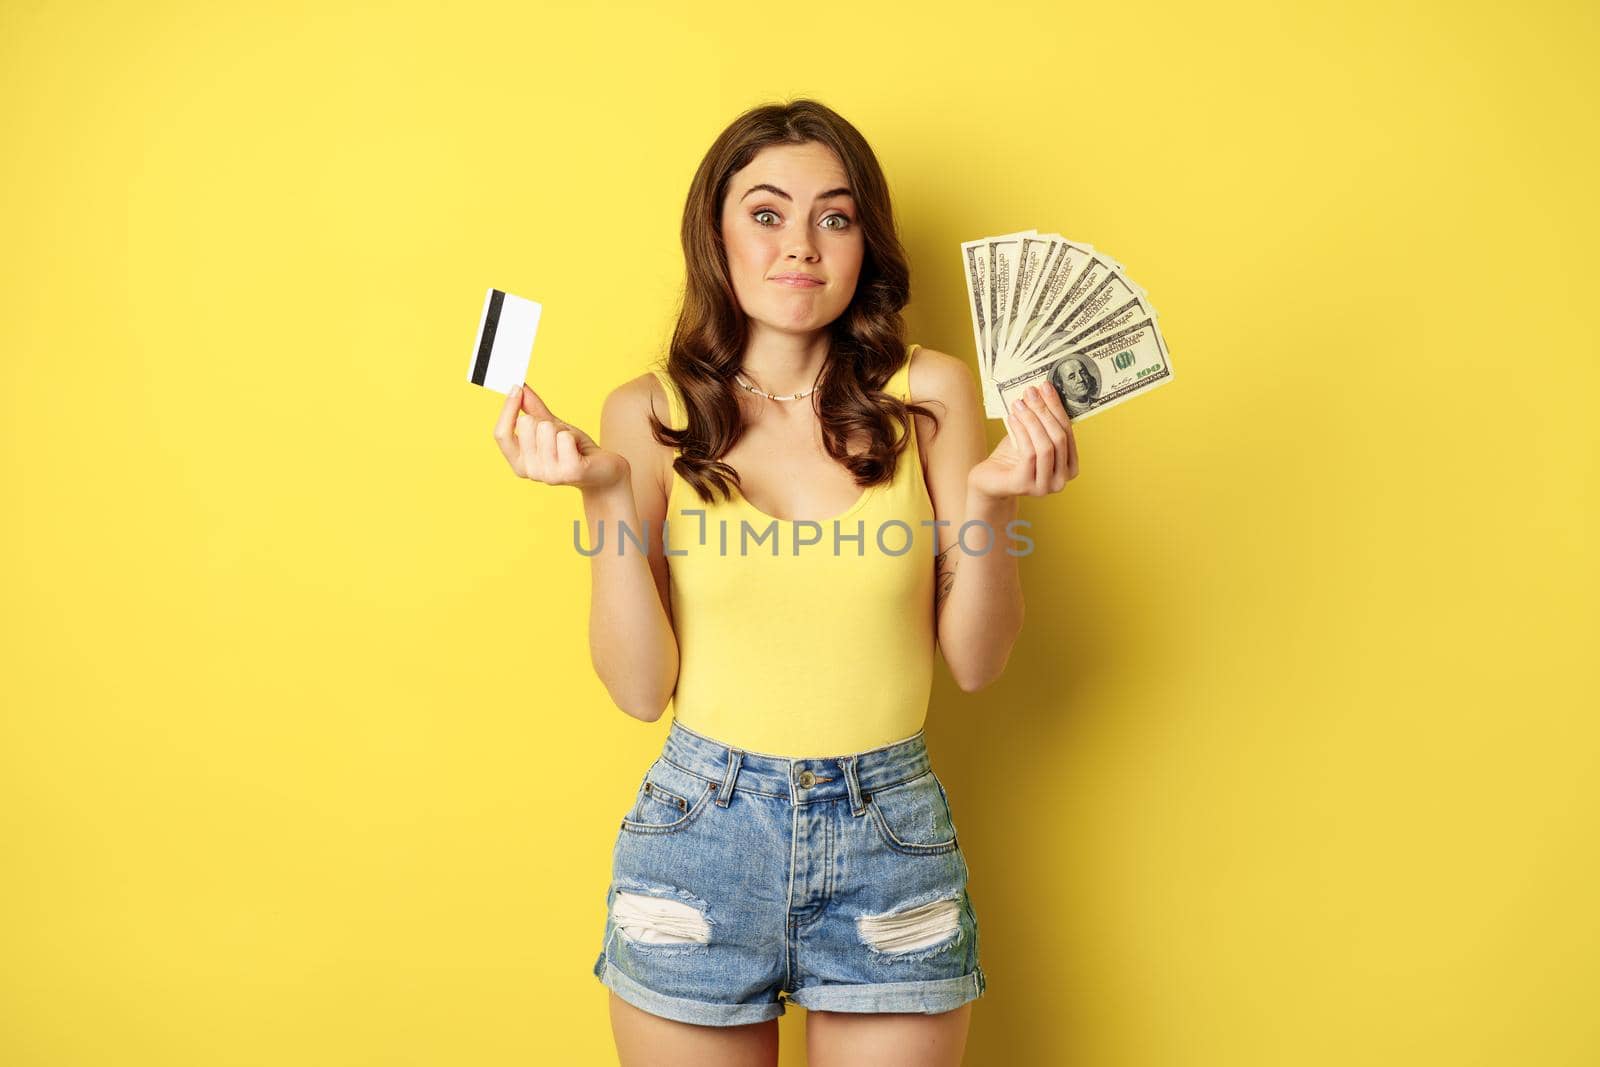 Young pretty woman in summer outfit holding credit card and money, cash in hands, standing against yellow background.